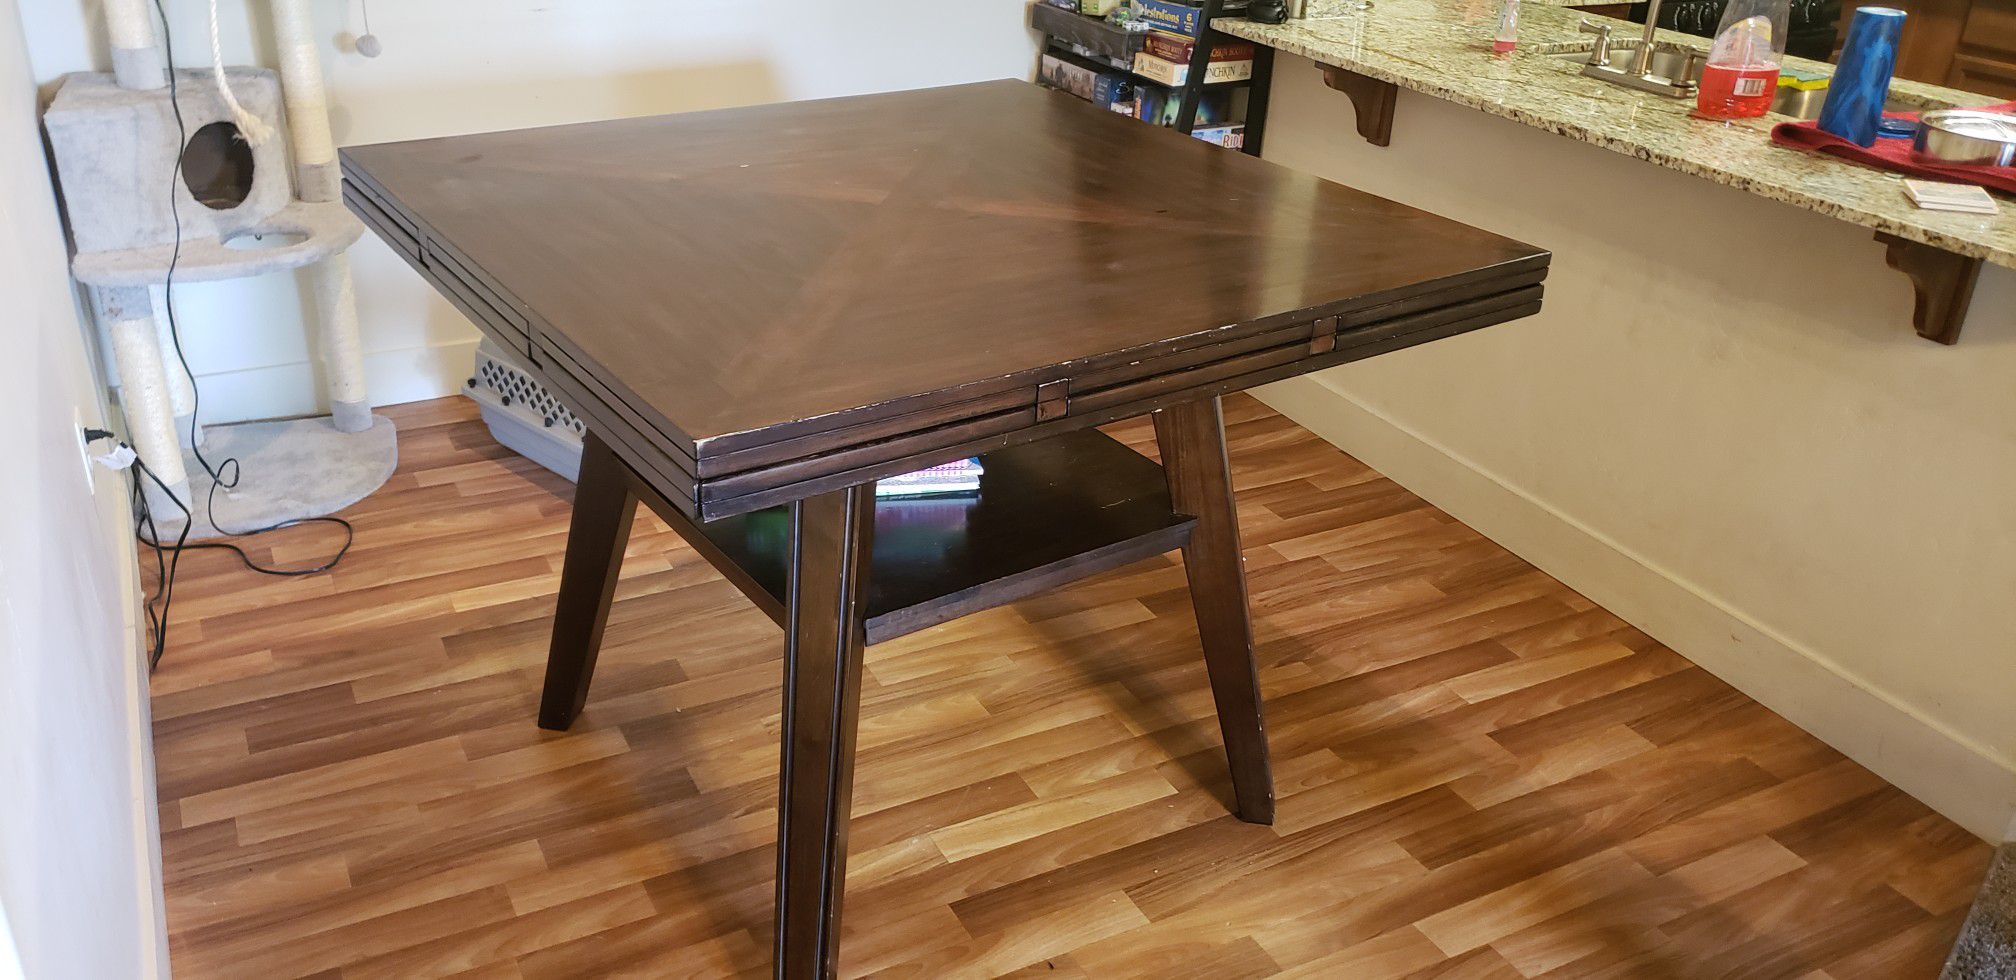 Dark oak dining table with 6 chairs